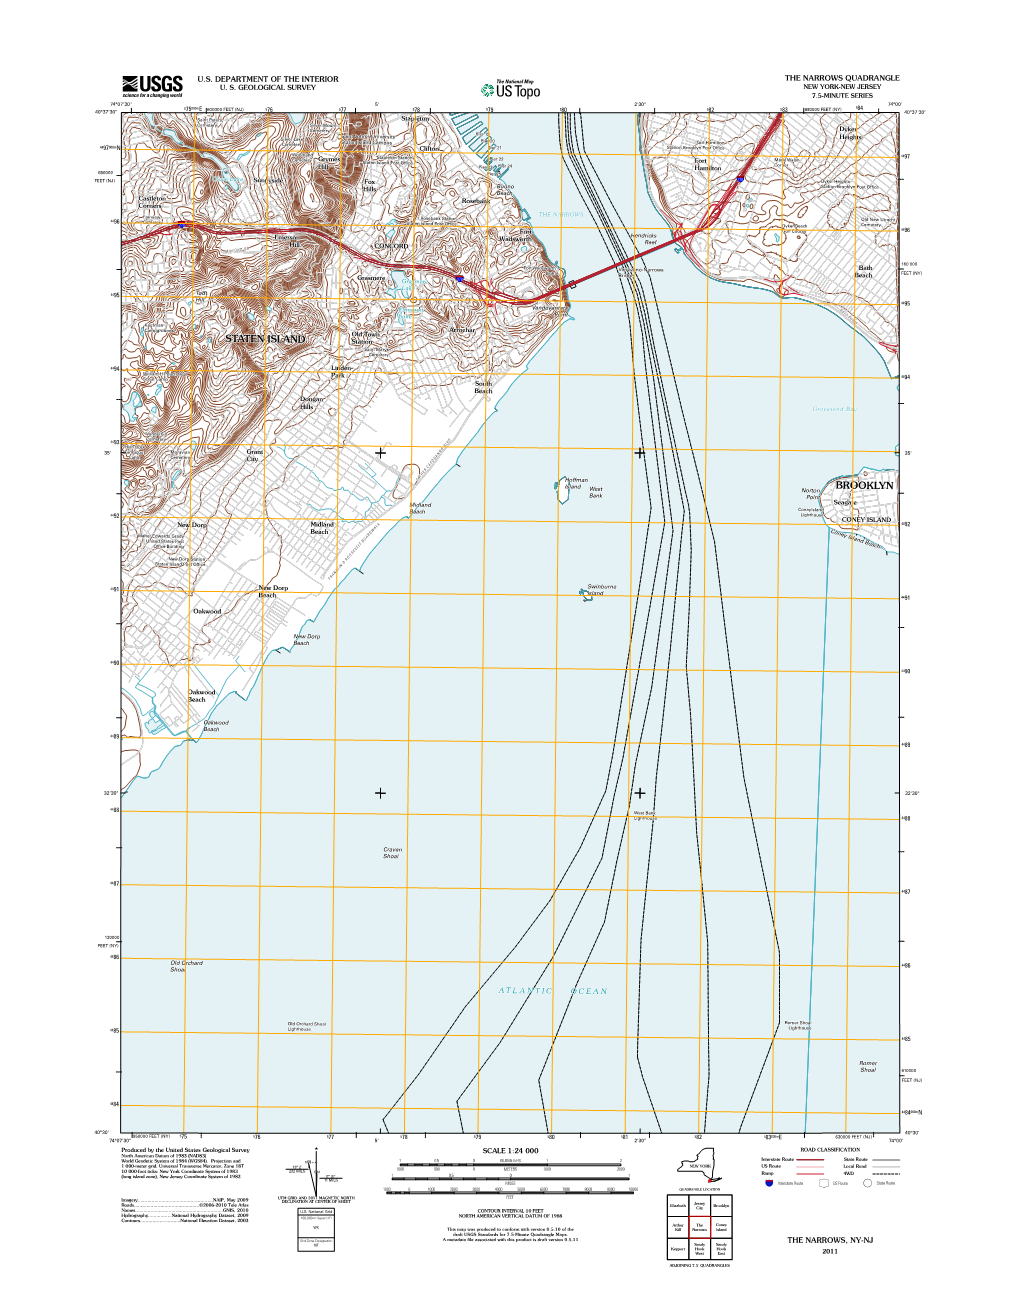 USGS 7.5-Minute Image Map for the Narrows, New York